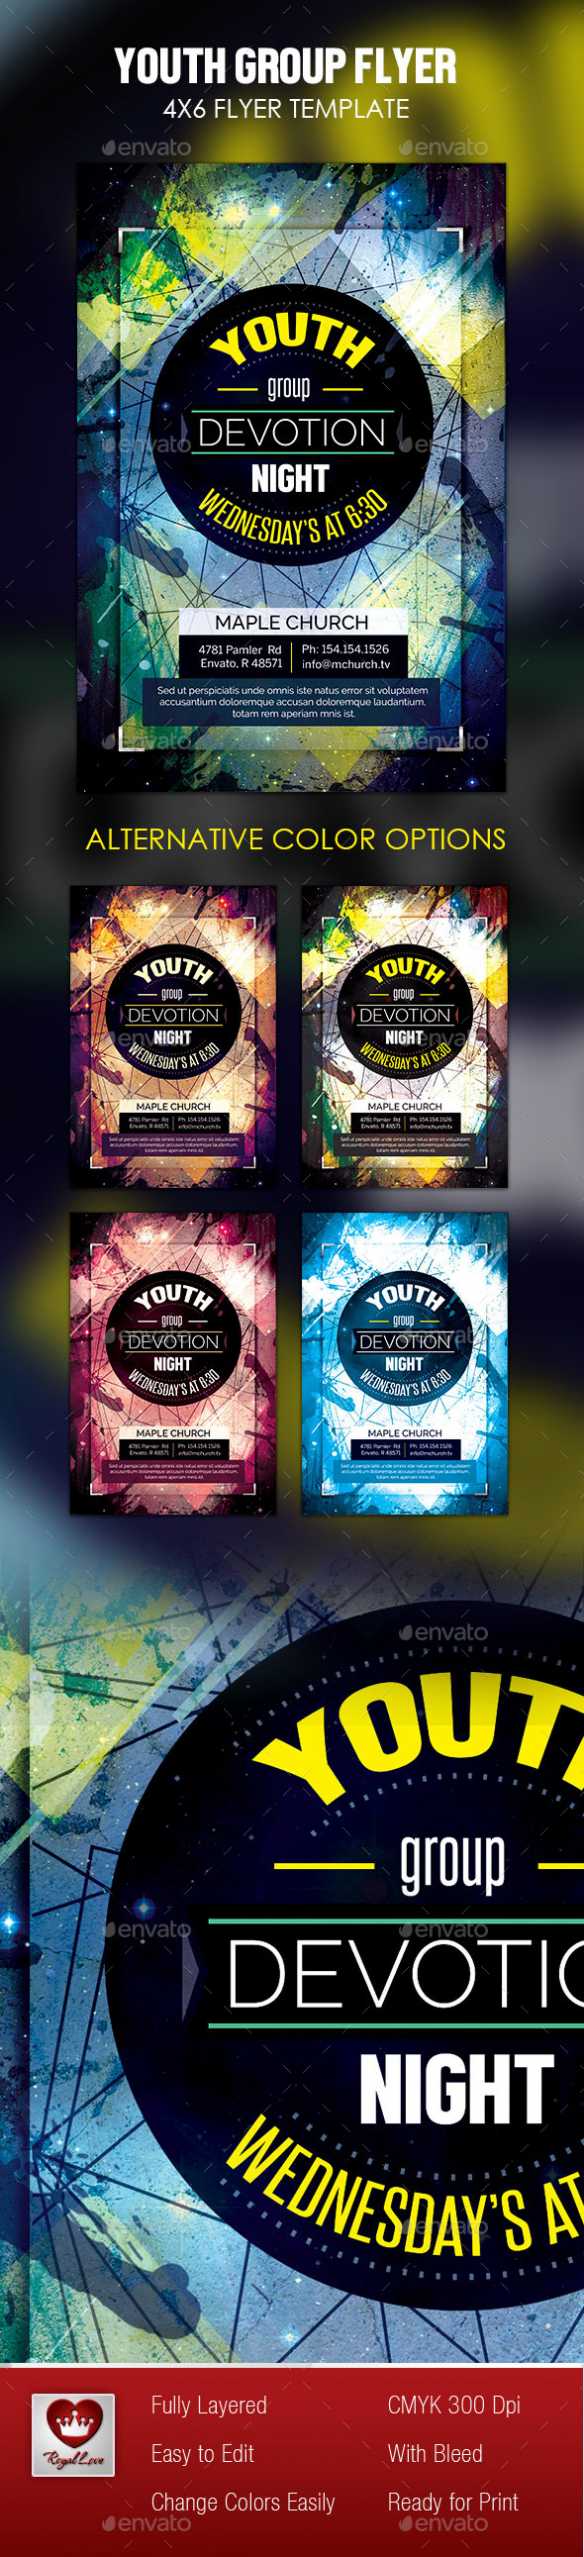 Youth Flyer Graphics, Designs &amp; Templates From Graphicriver inside Youth Group Flyer Template Free